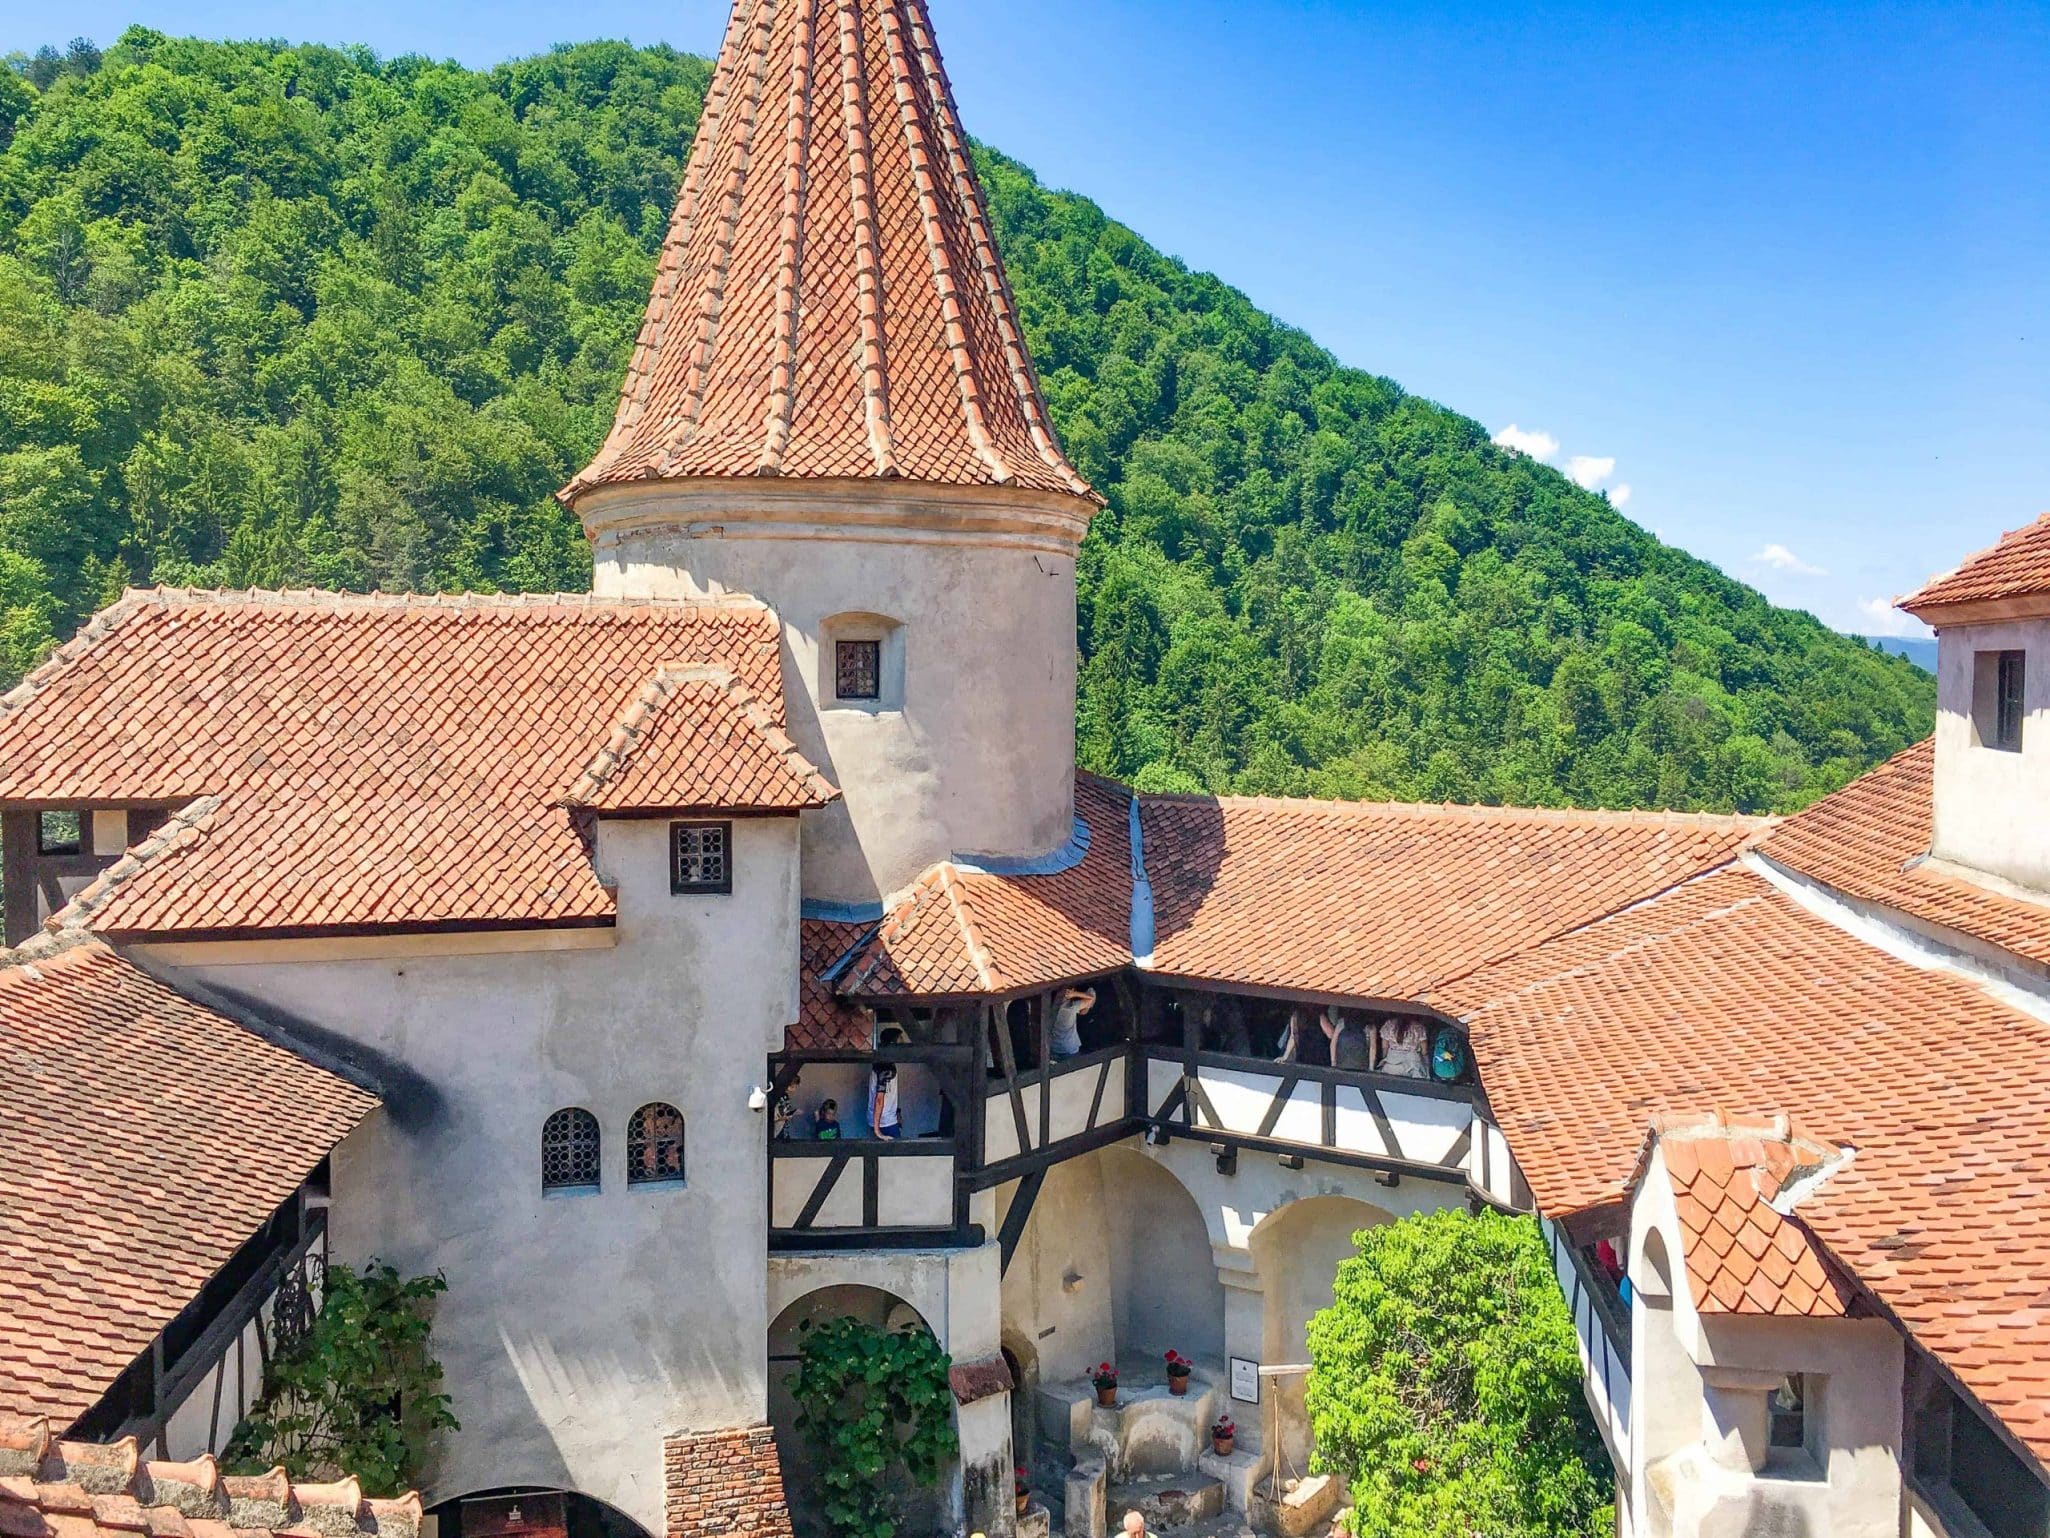 3 simple ways to get from Brasov to Bran Castle (Dracula’s castle)